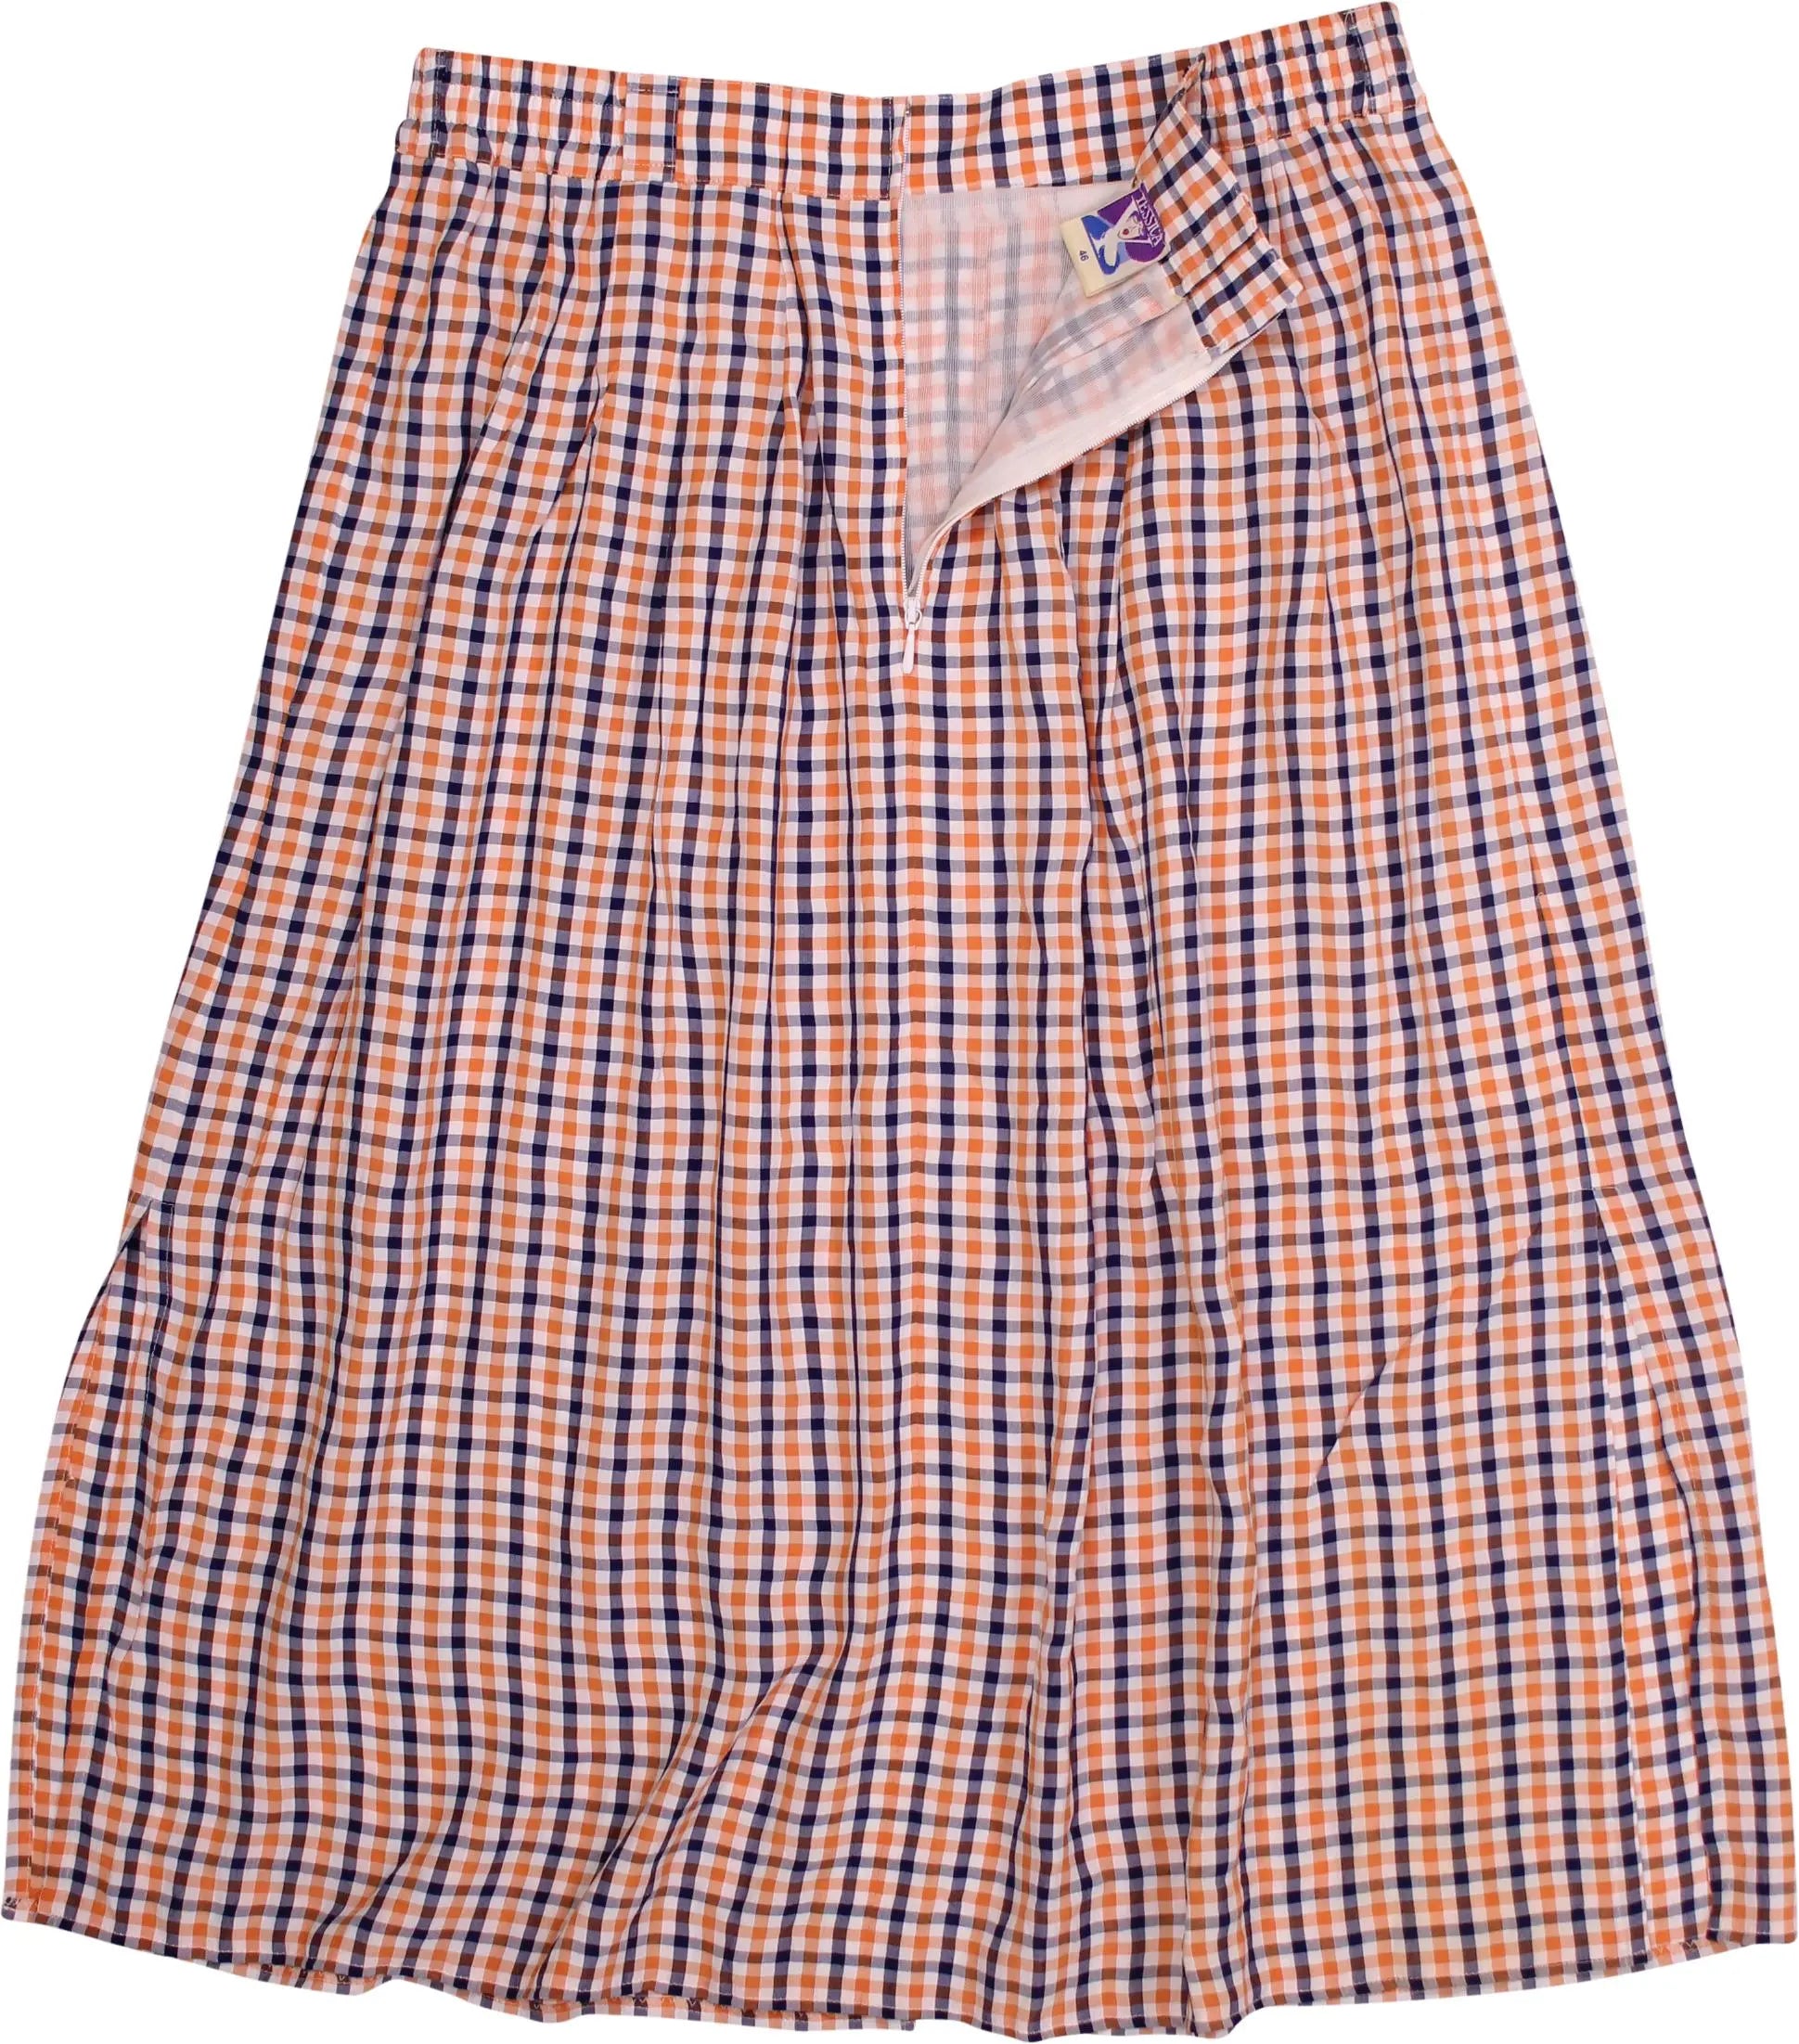 C&A - Vintage Checked Skirt by Yessica- ThriftTale.com - Vintage and second handclothing